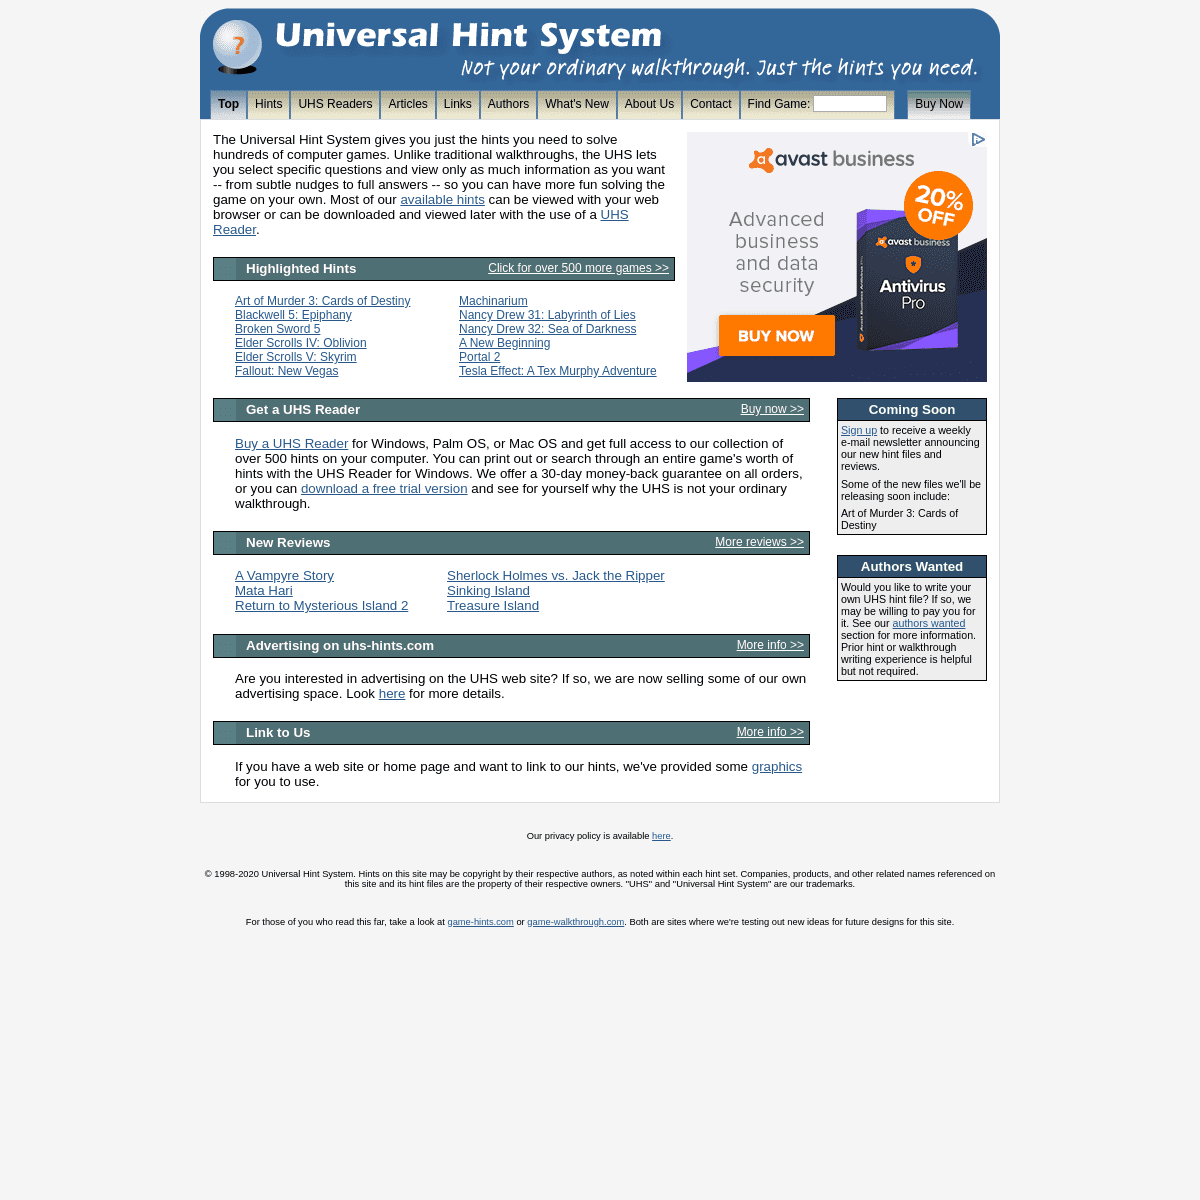 A complete backup of uhs-hints.com